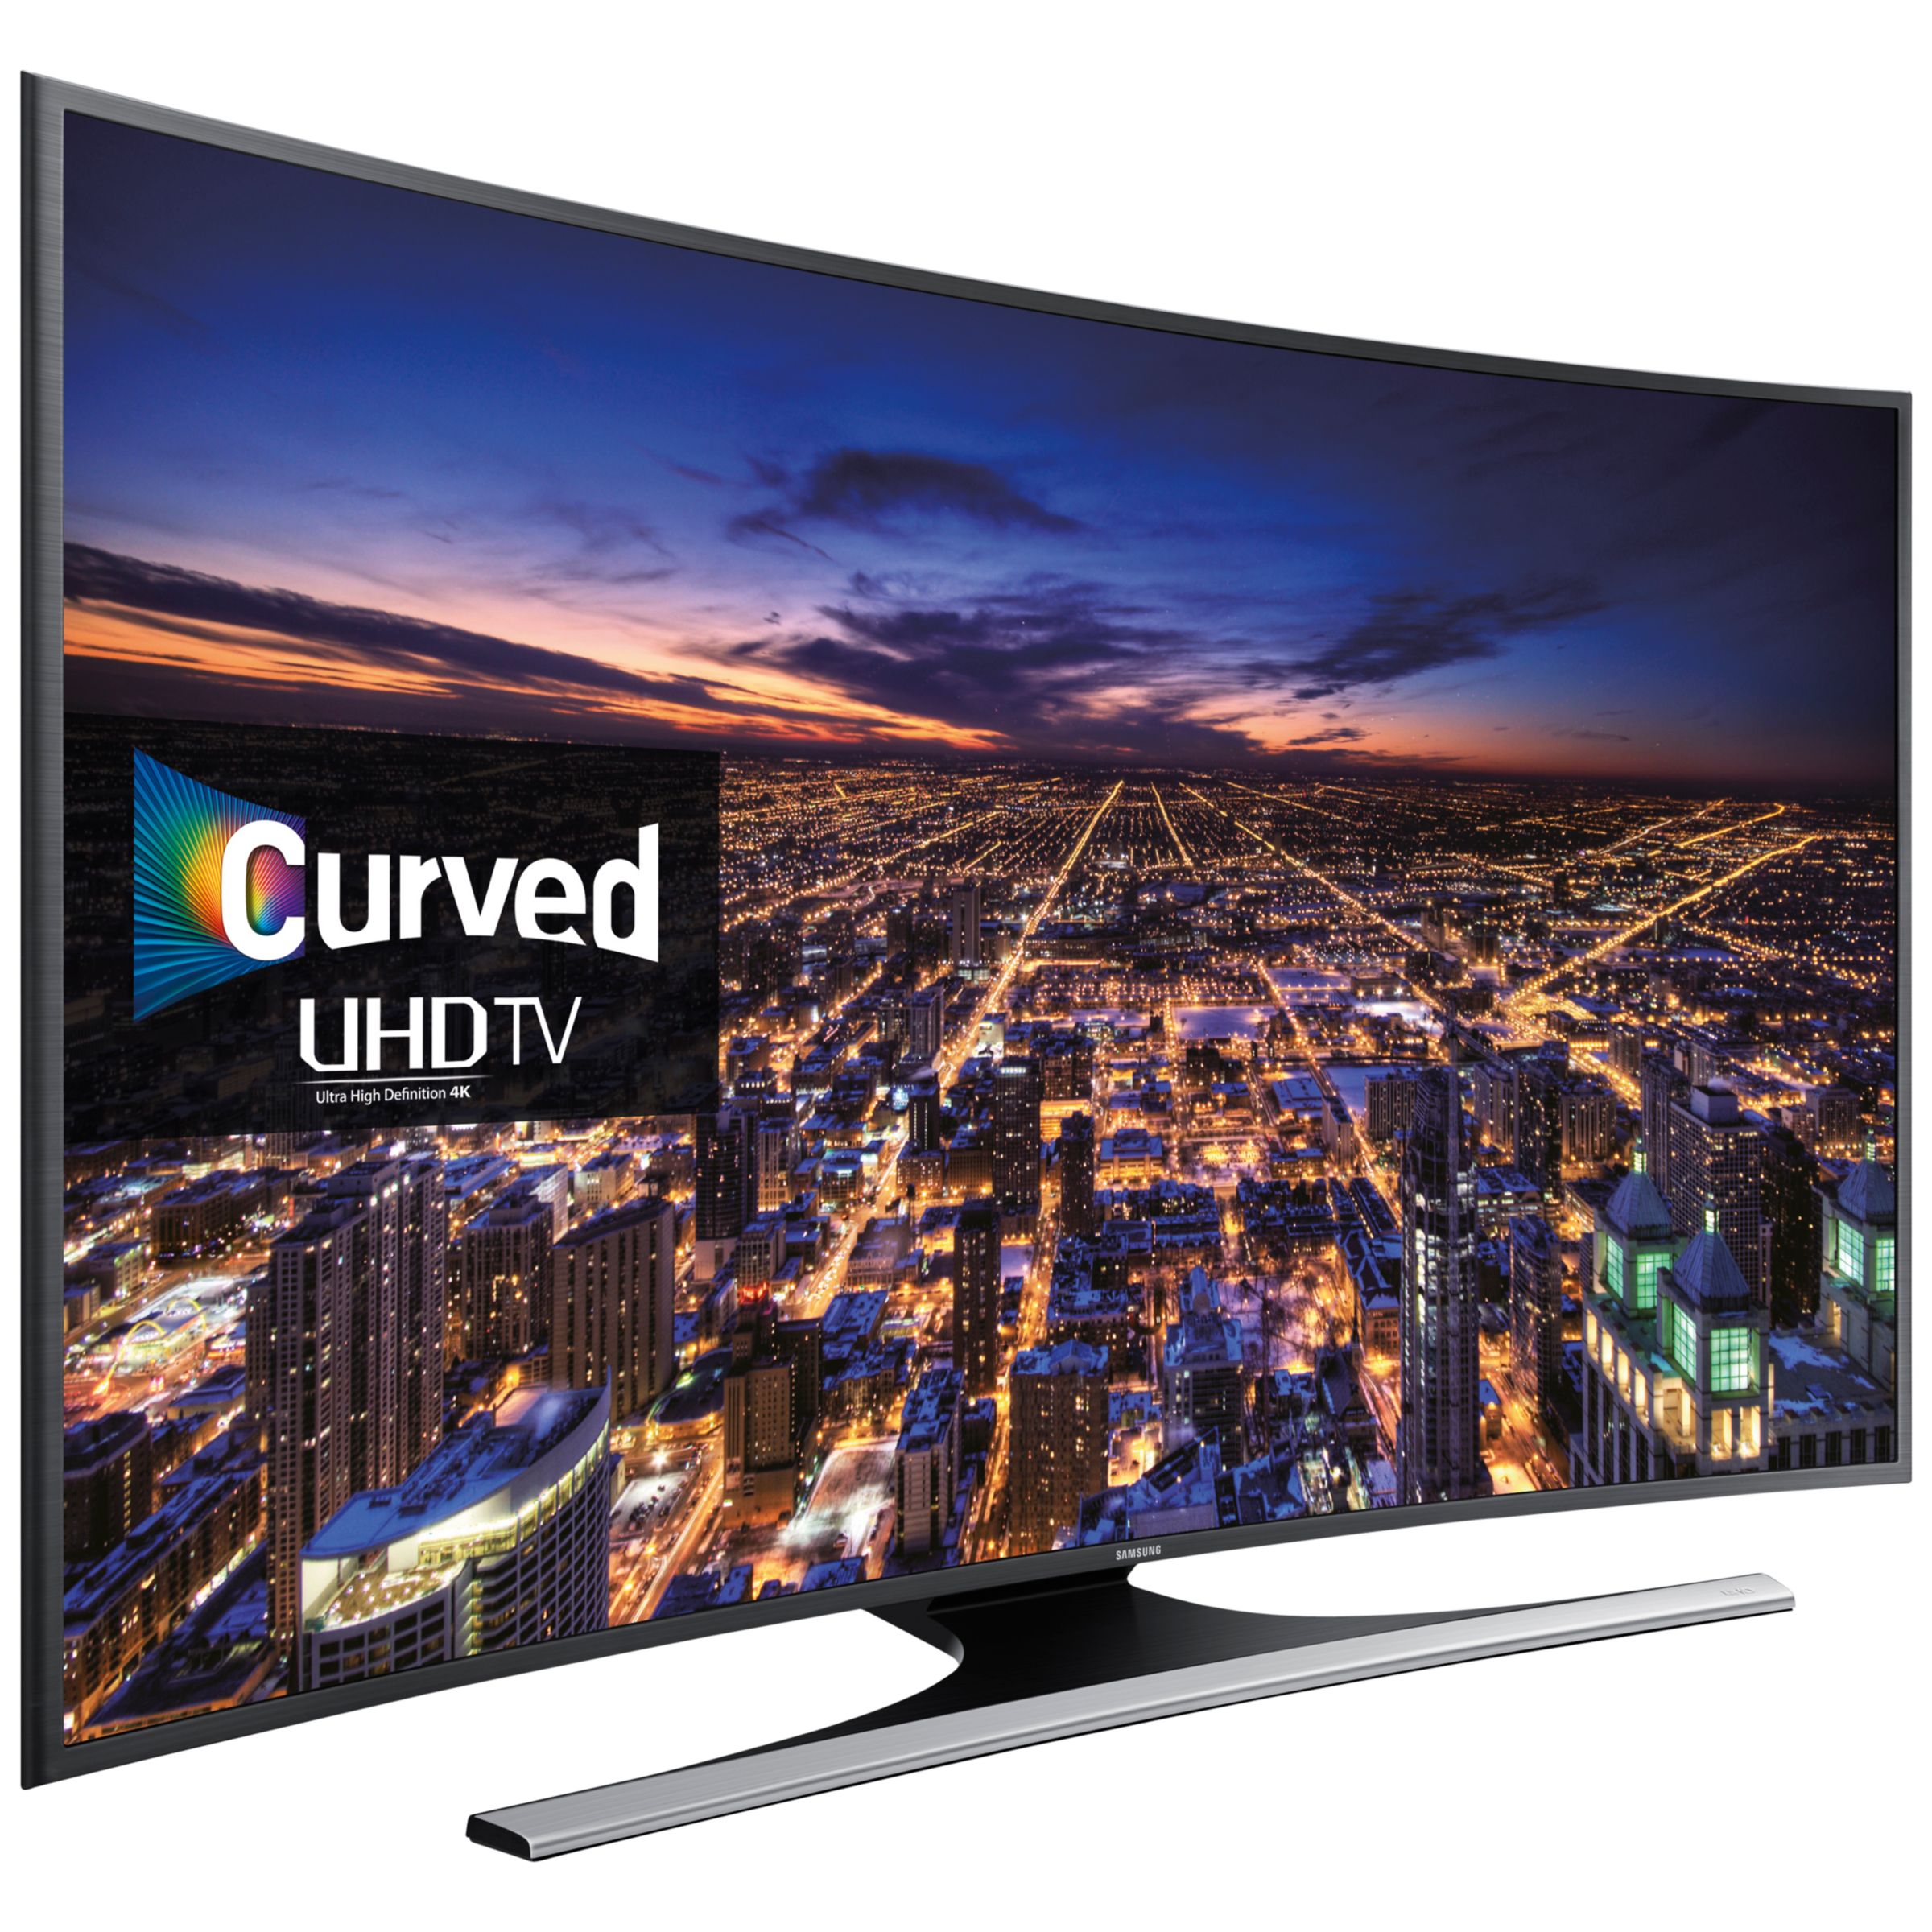 Samsung UE55JU6500 HDR Ultra HD Smart TV, 55" with Freeview HD, Built-In Wi-Fi and Intelligent Navigation